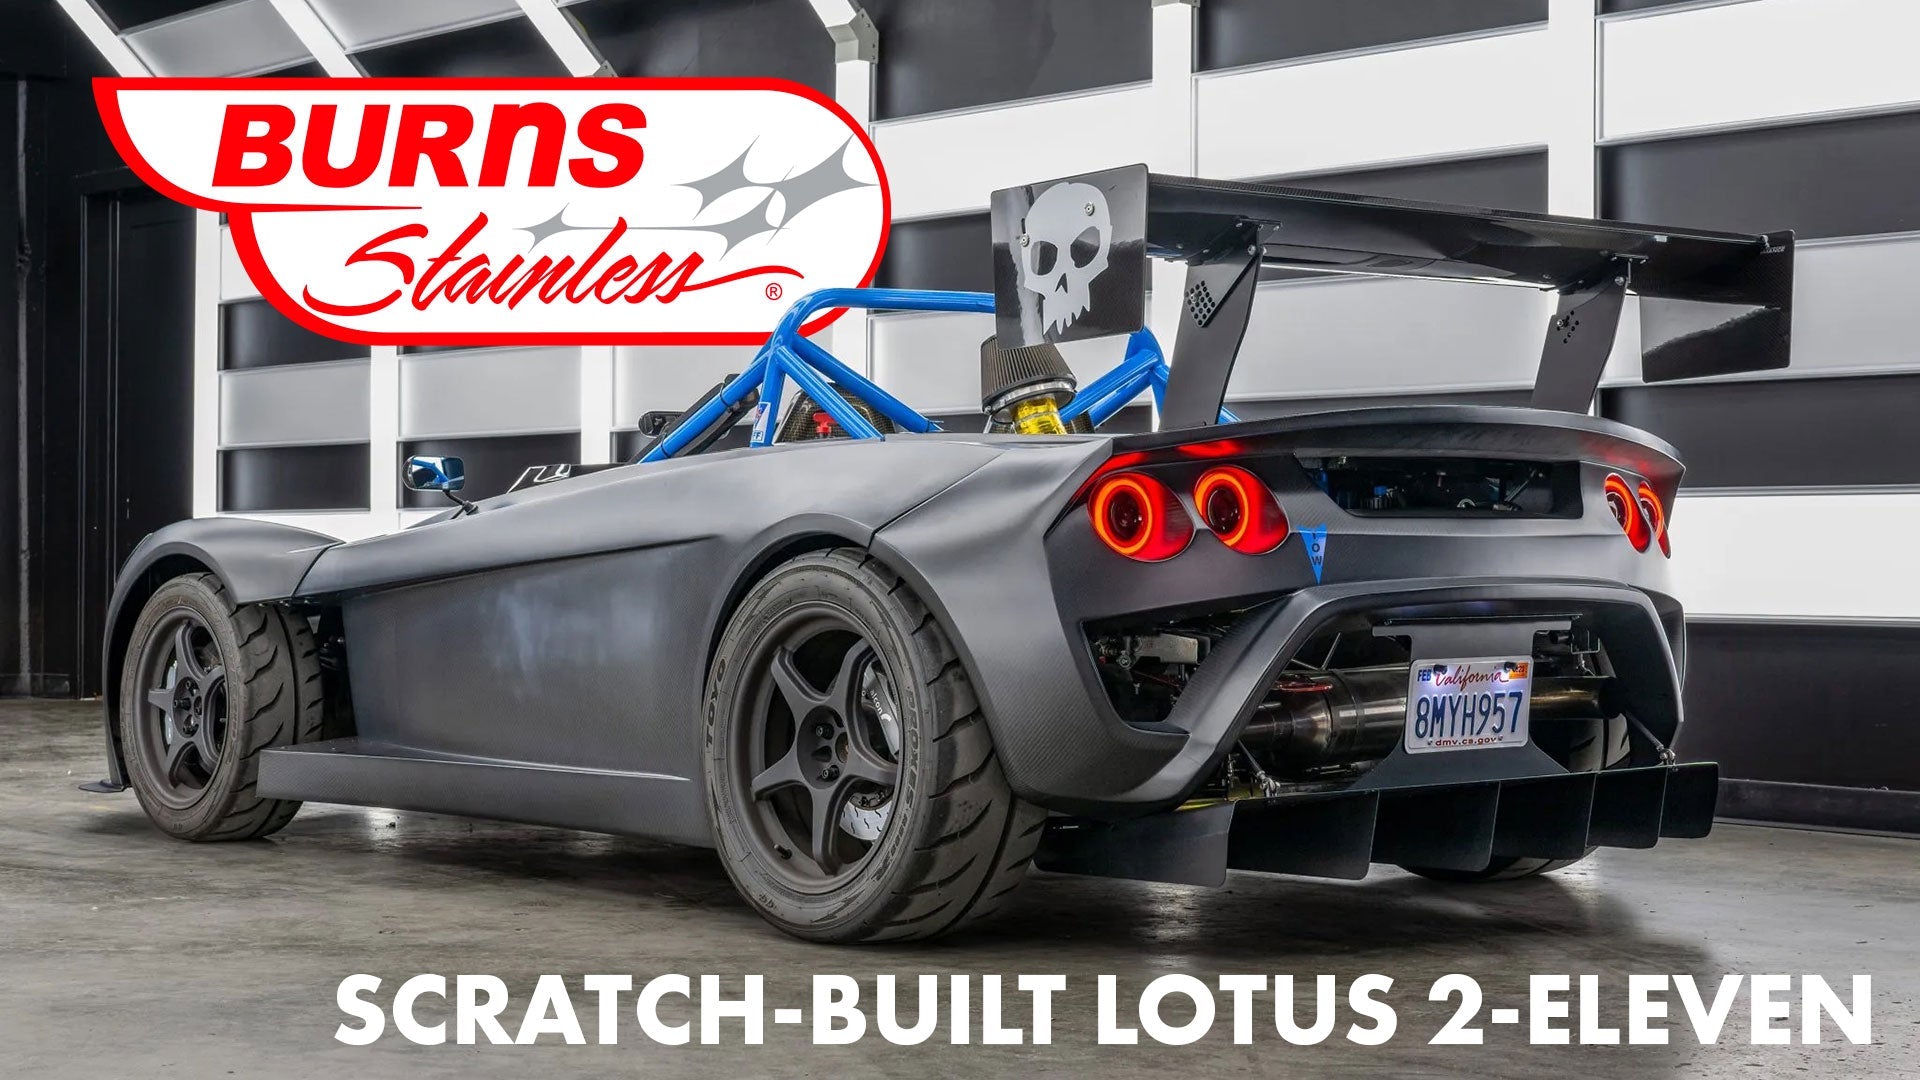 Relentlessly Innovated Lotus Feature on Burns Stainless Articles